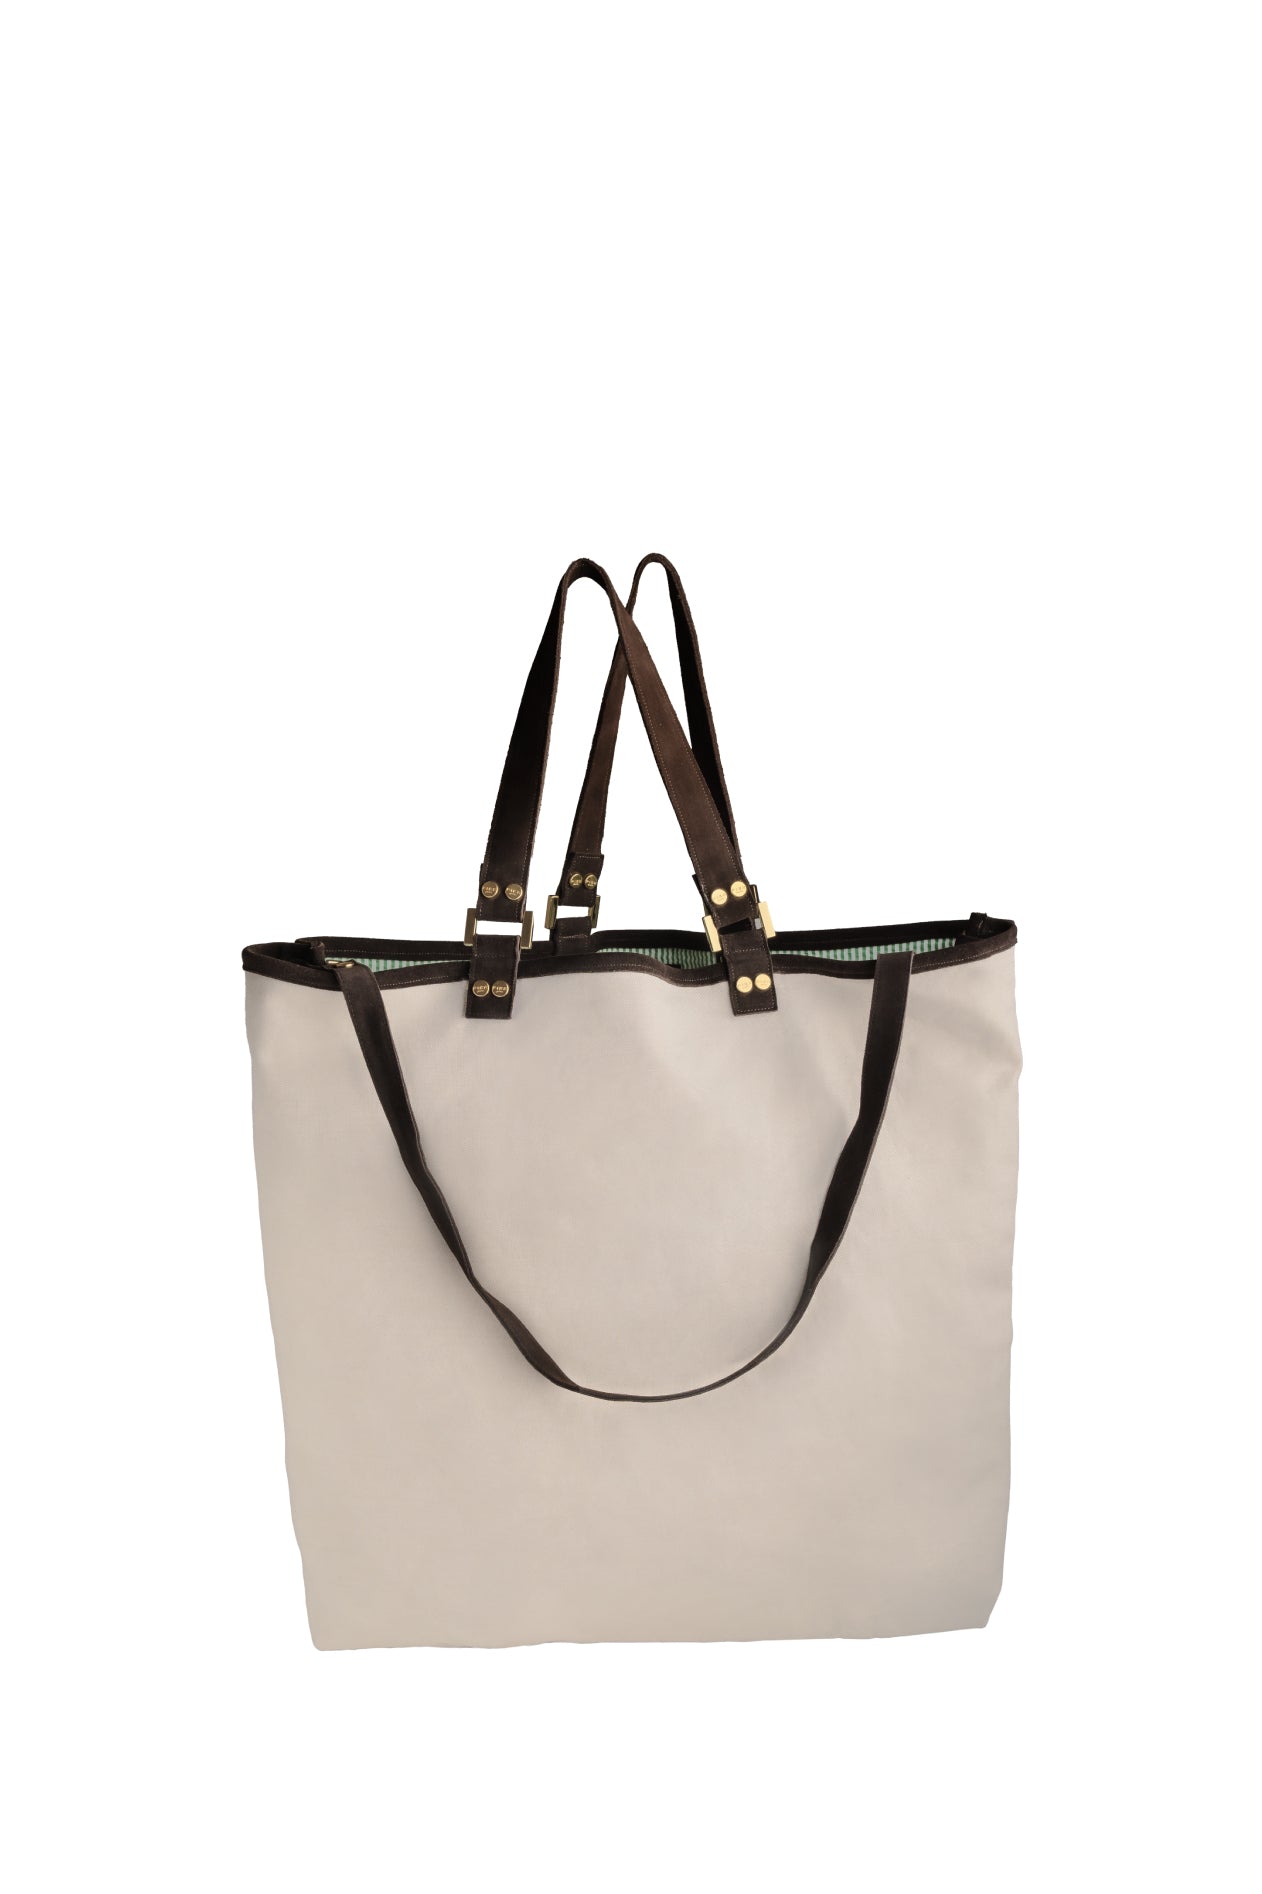 SALINA TOTE CANVAS WHITE WITH SEERSUCKER GREEN LINING-REVERSIBILE (SIZE L)